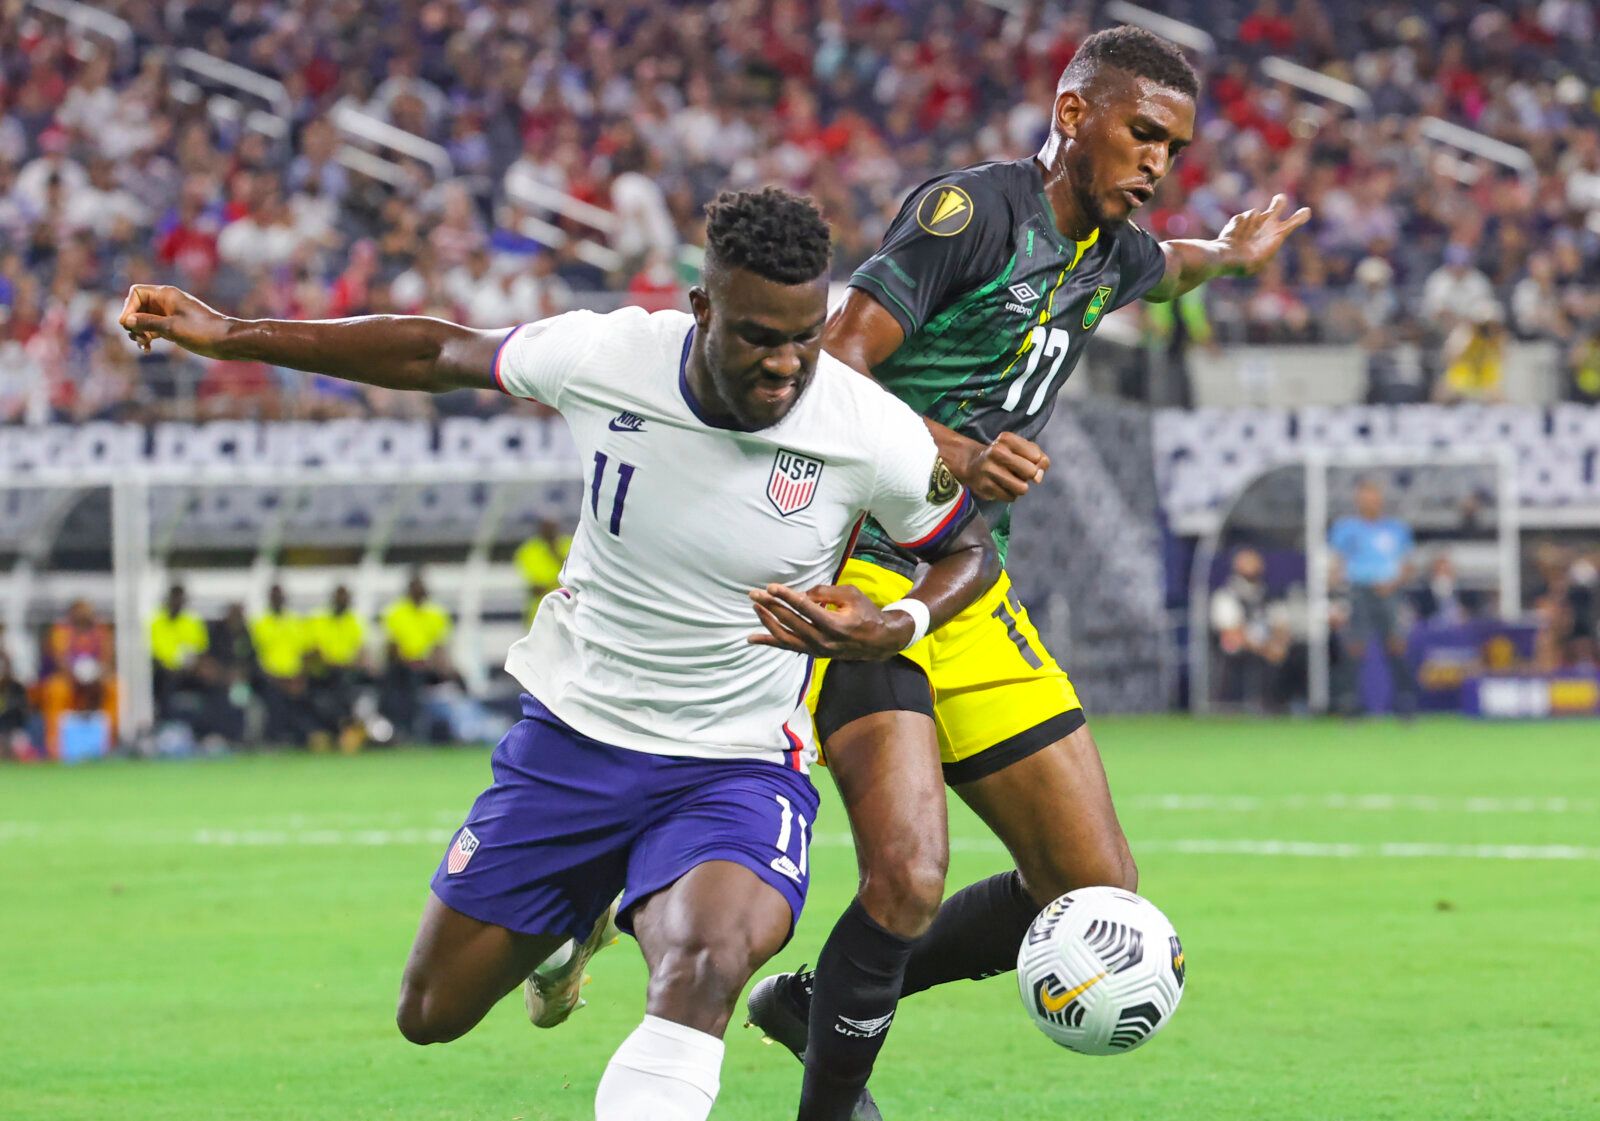 Jul 25, 2021; Arlington, Texas, USA; United States forward Daryl Dike (11) and Jamaica defender Damion Lowe (17)  battle for the ball during the first half of a CONCACAF Gold Cup quarterfinal soccer match at AT&amp;T Stadium. Mandatory Credit: Kevin Jairaj-USA TODAY Sports